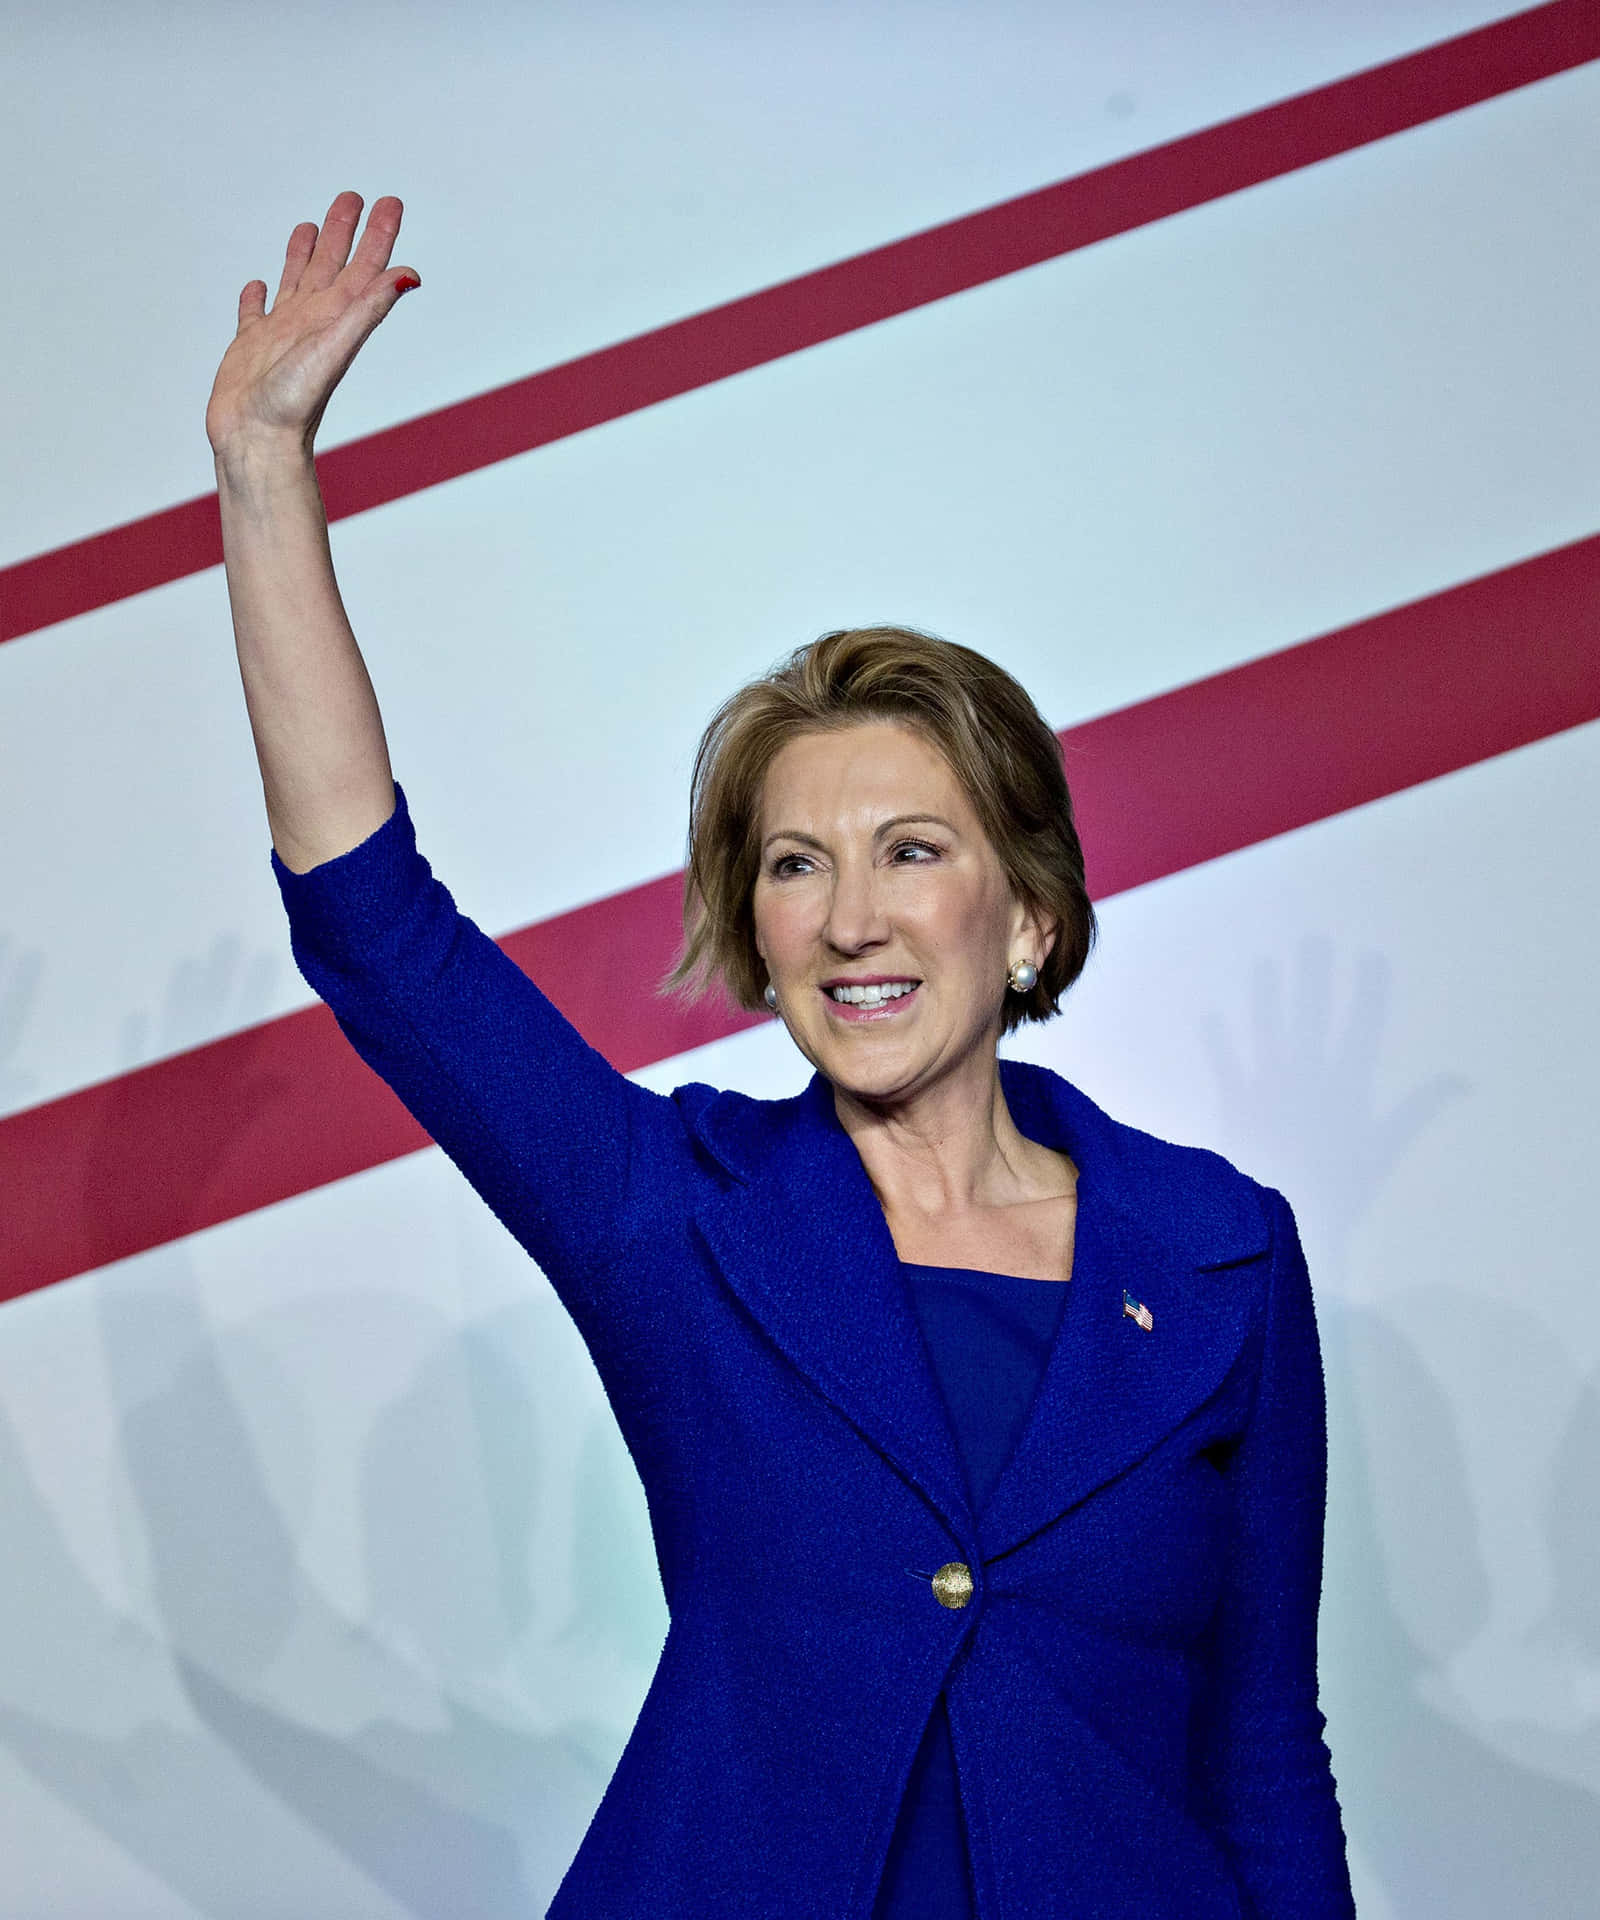 Carly Fiorina Waving While On Stage Wallpaper